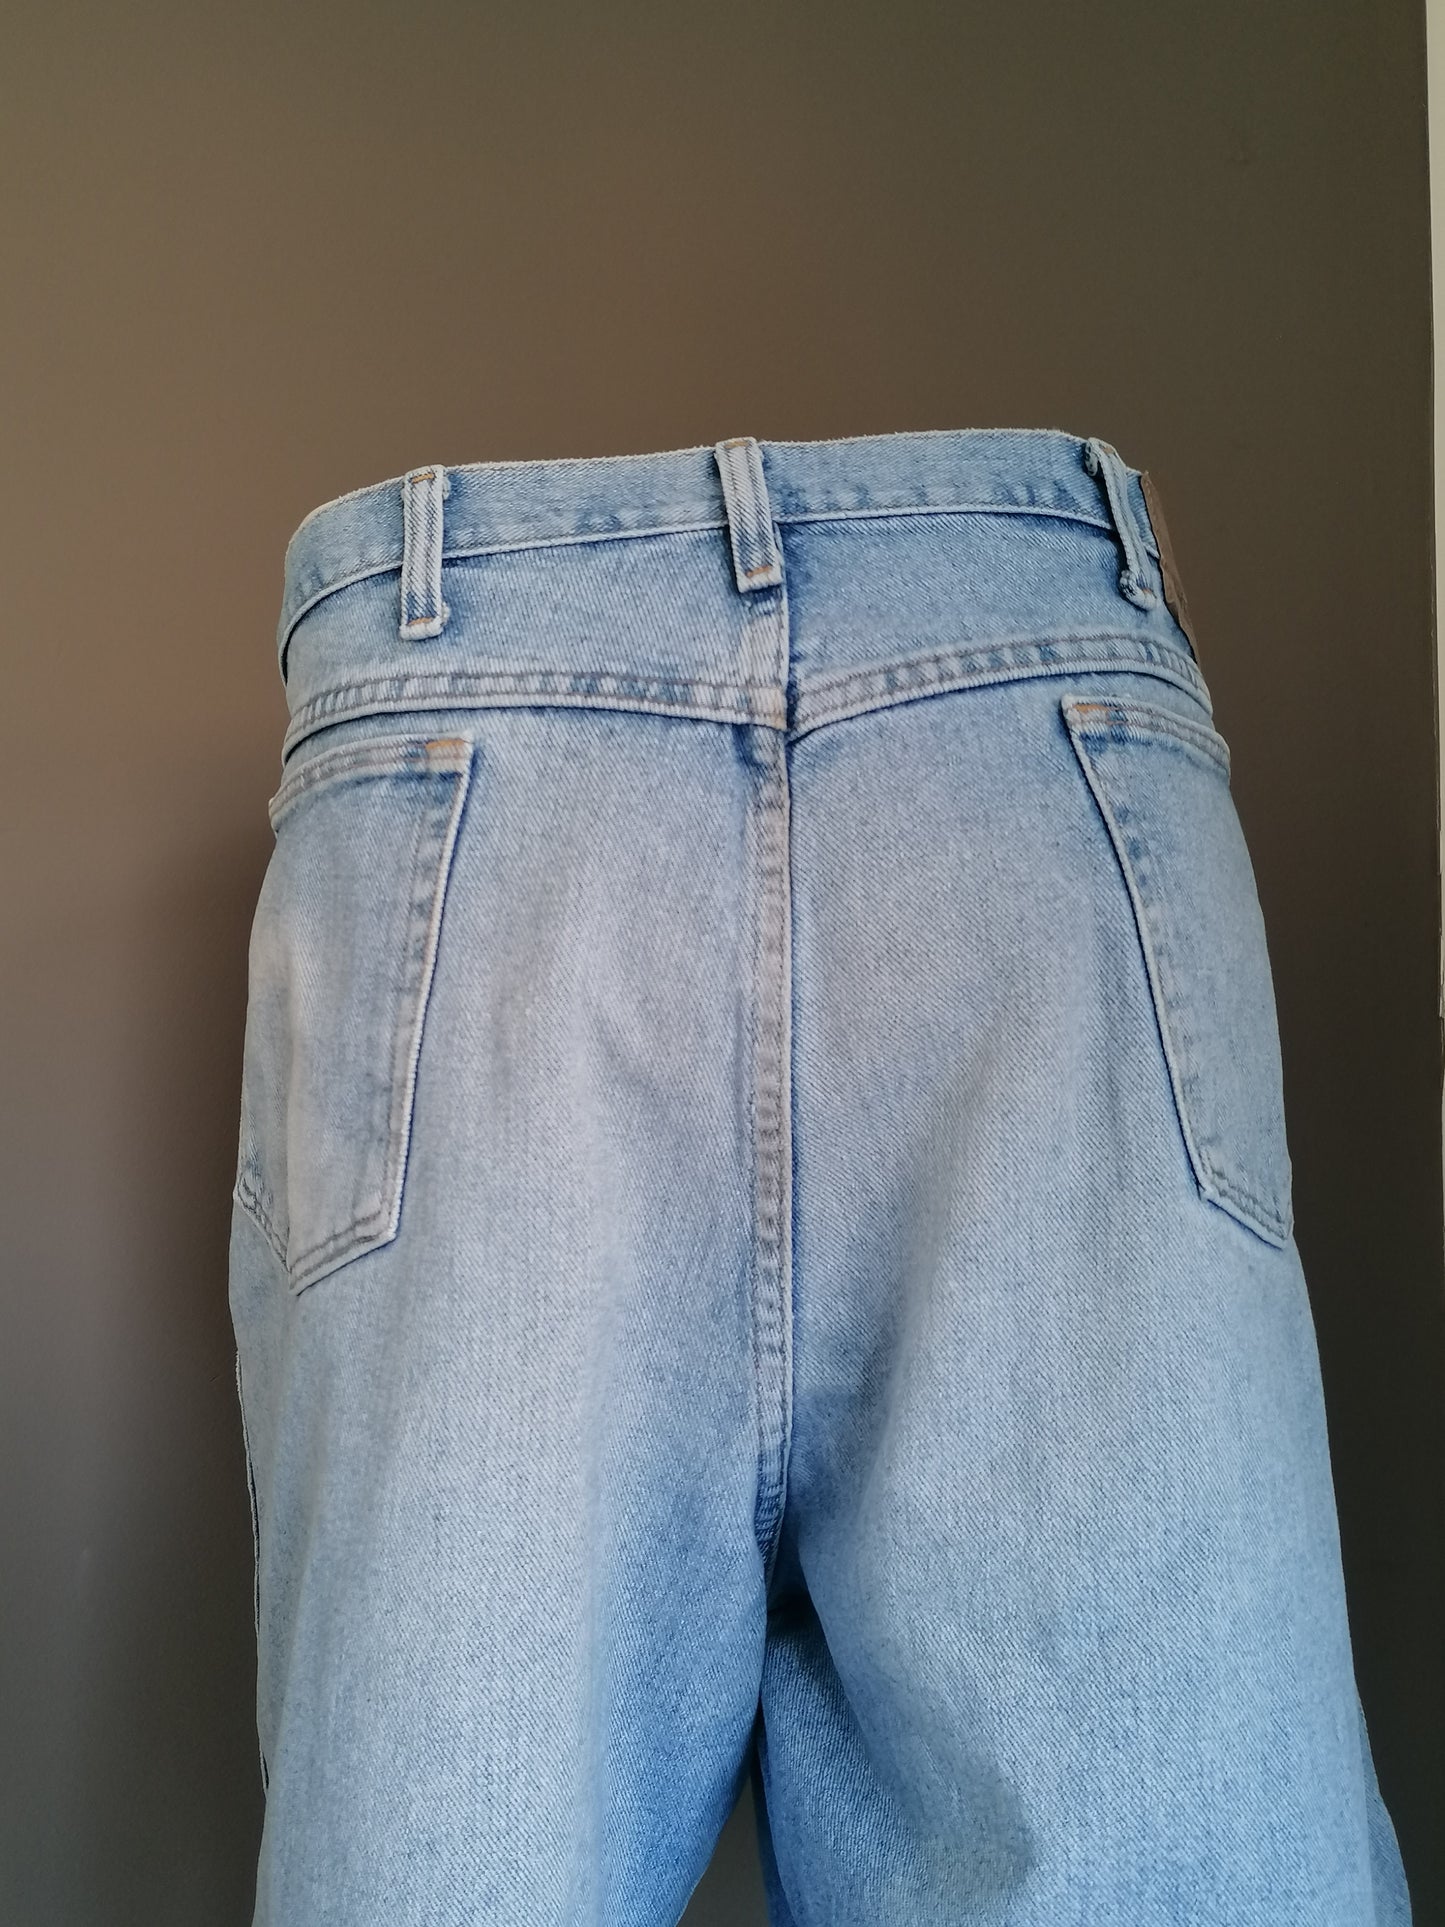 Wrangler jeans shorts. Colored light blue. Size W40.